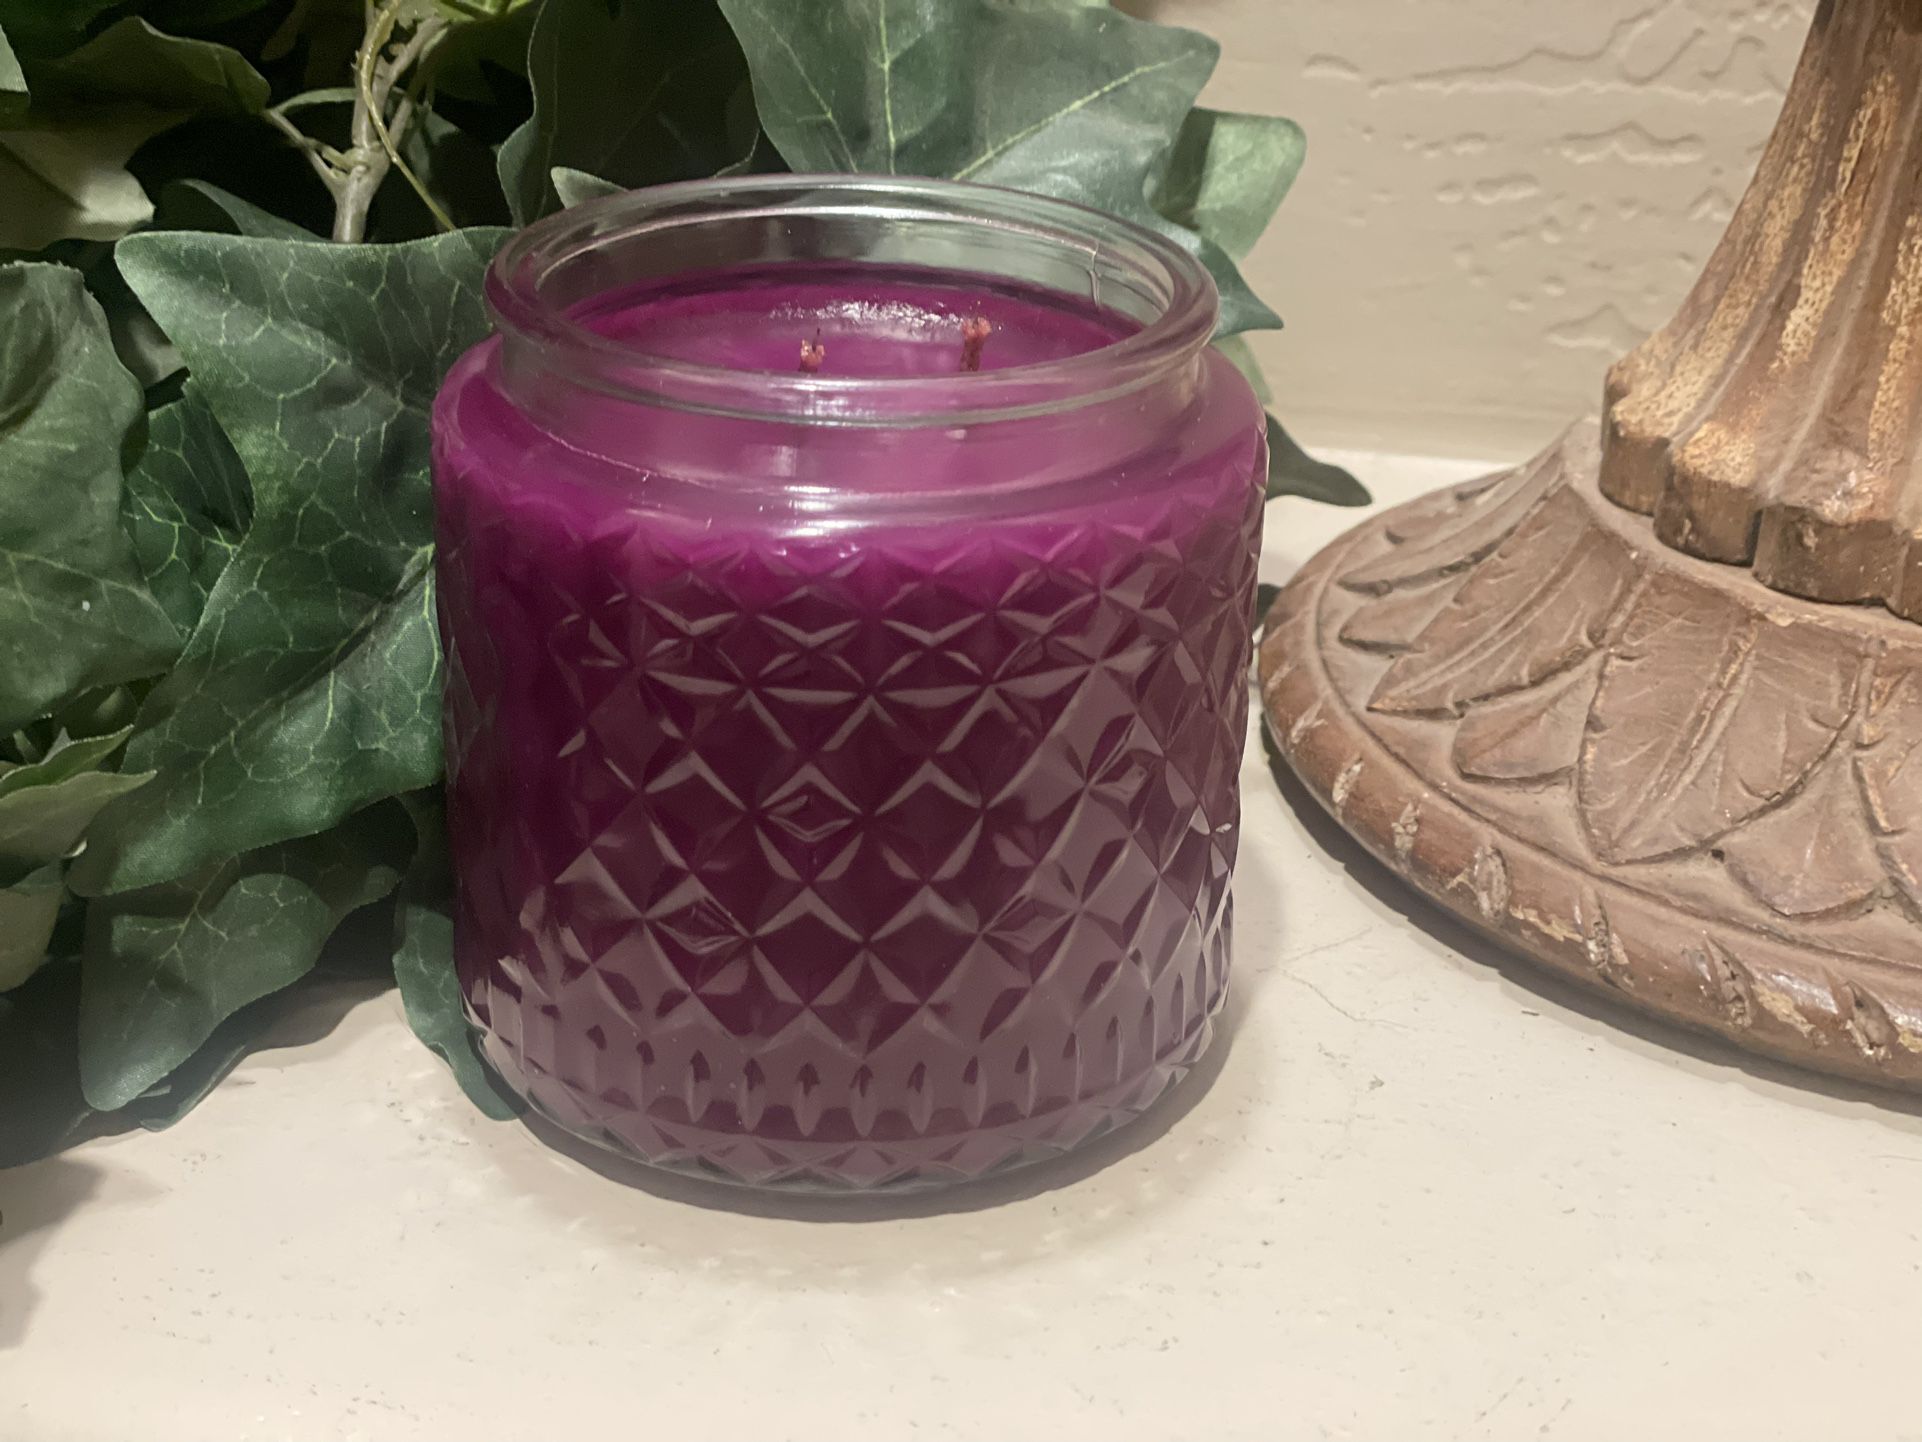 Gold Canyon Candles-Graple Berry 🍇